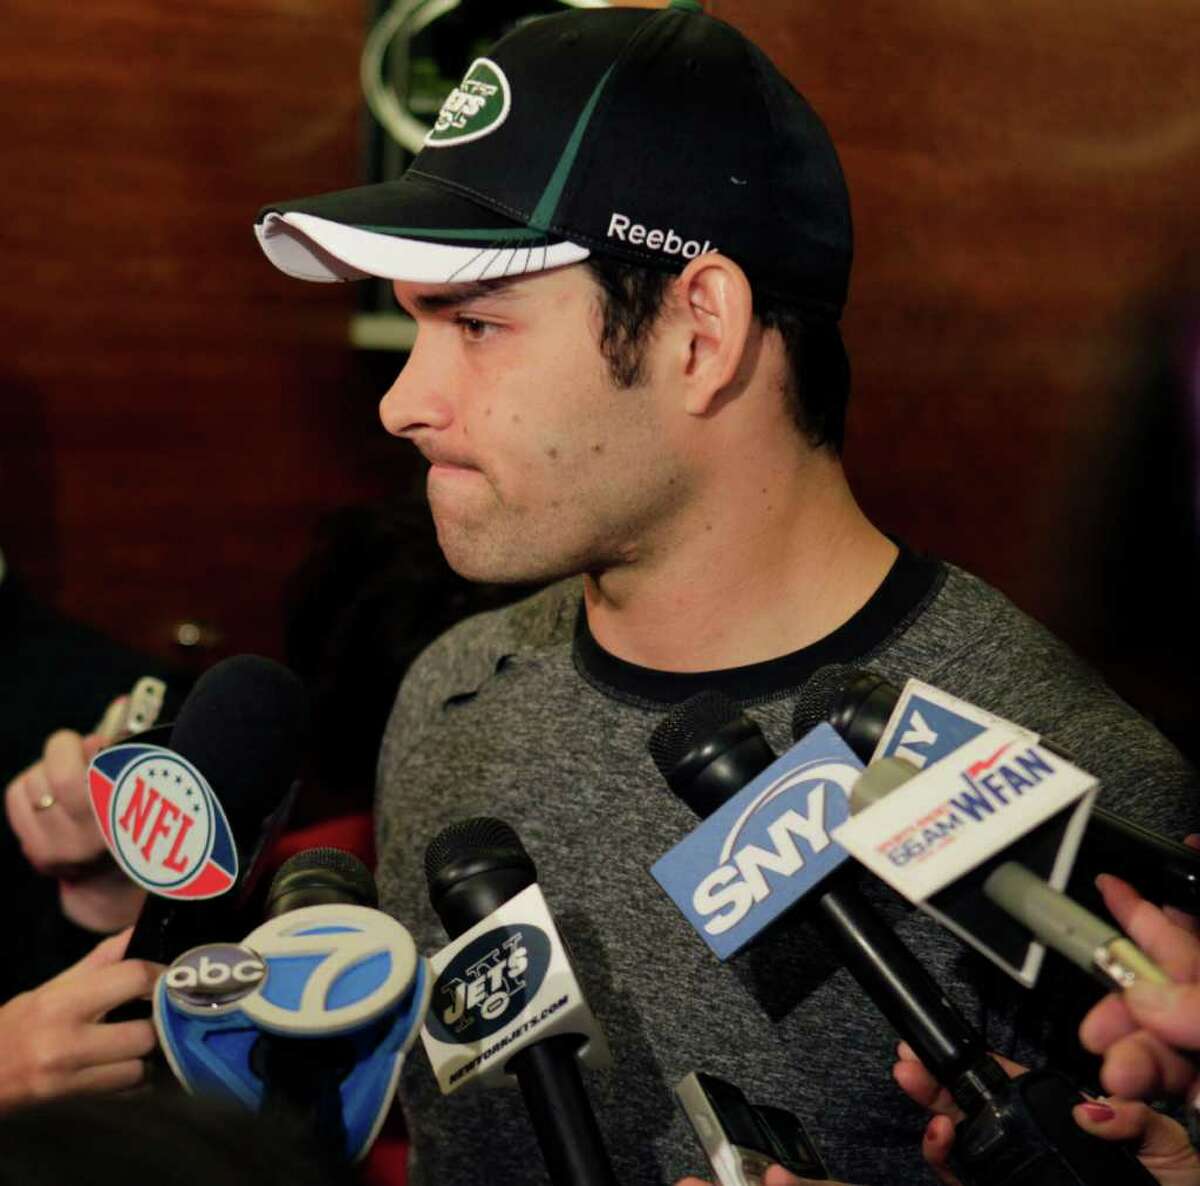 New York Jets quarterback Mark Sanchez talks to reporters in the Jets' locker room in Florham Park, N.J., Monday, Jan. 2, 2012. The Jets are going home after a season filled with inconsistent play, some in-fighting and lost opportunities. (AP Photo/Seth Wenig)